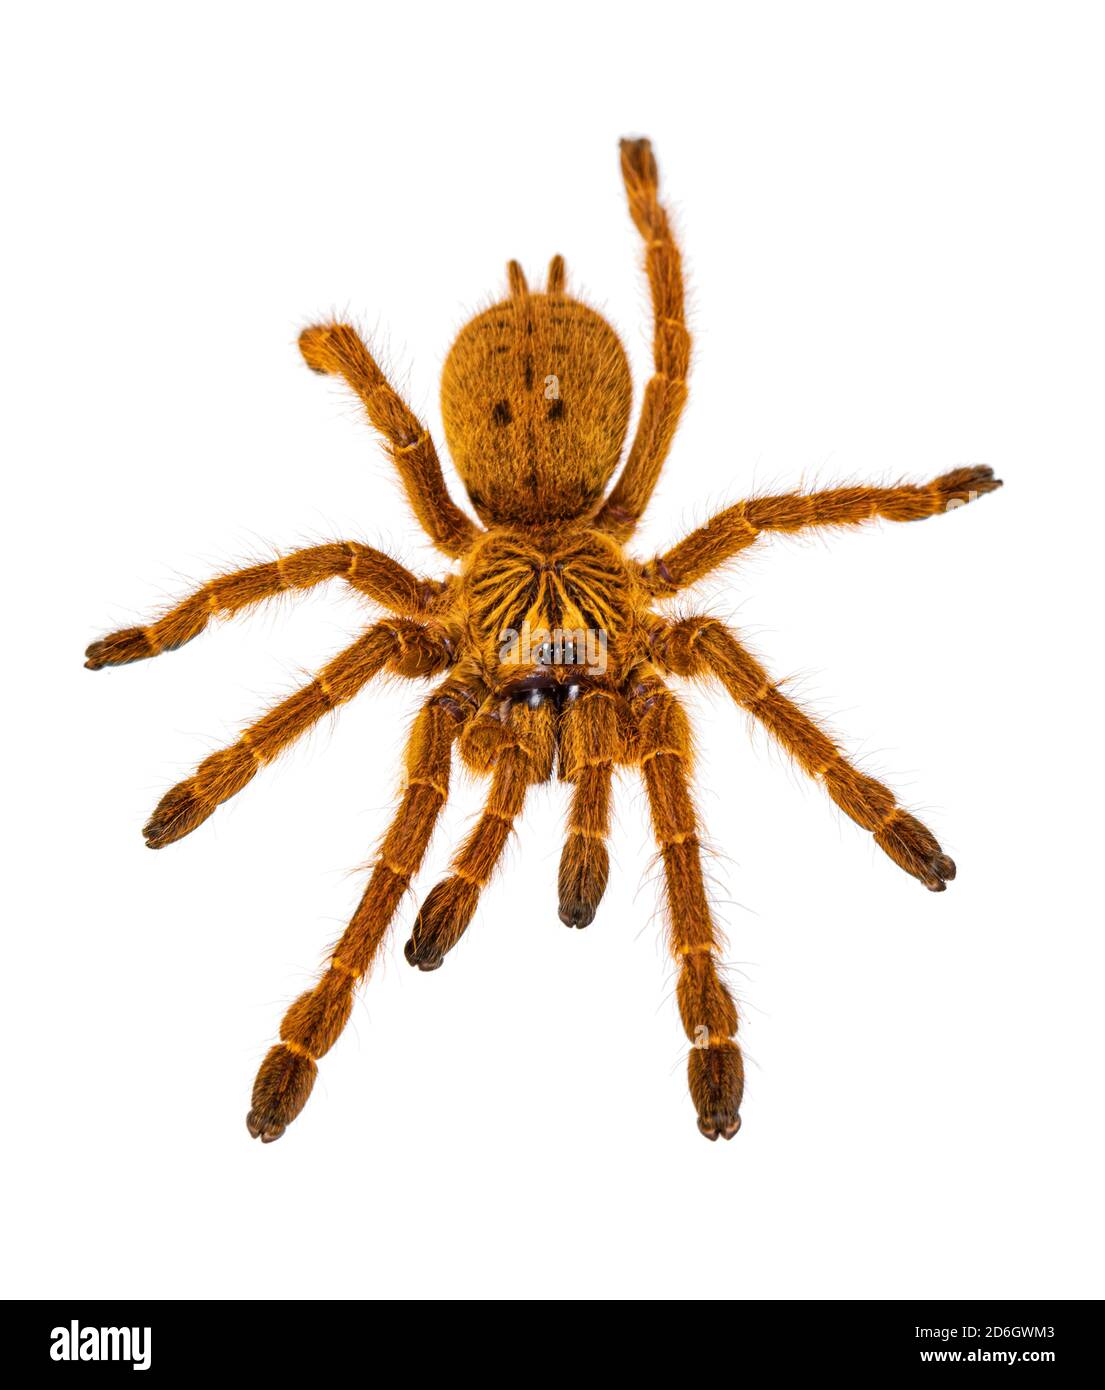 Top view of young Orange baboon tatantula spider aka Pterinochilus murinus RCF. Isolated on white background. Stock Photo